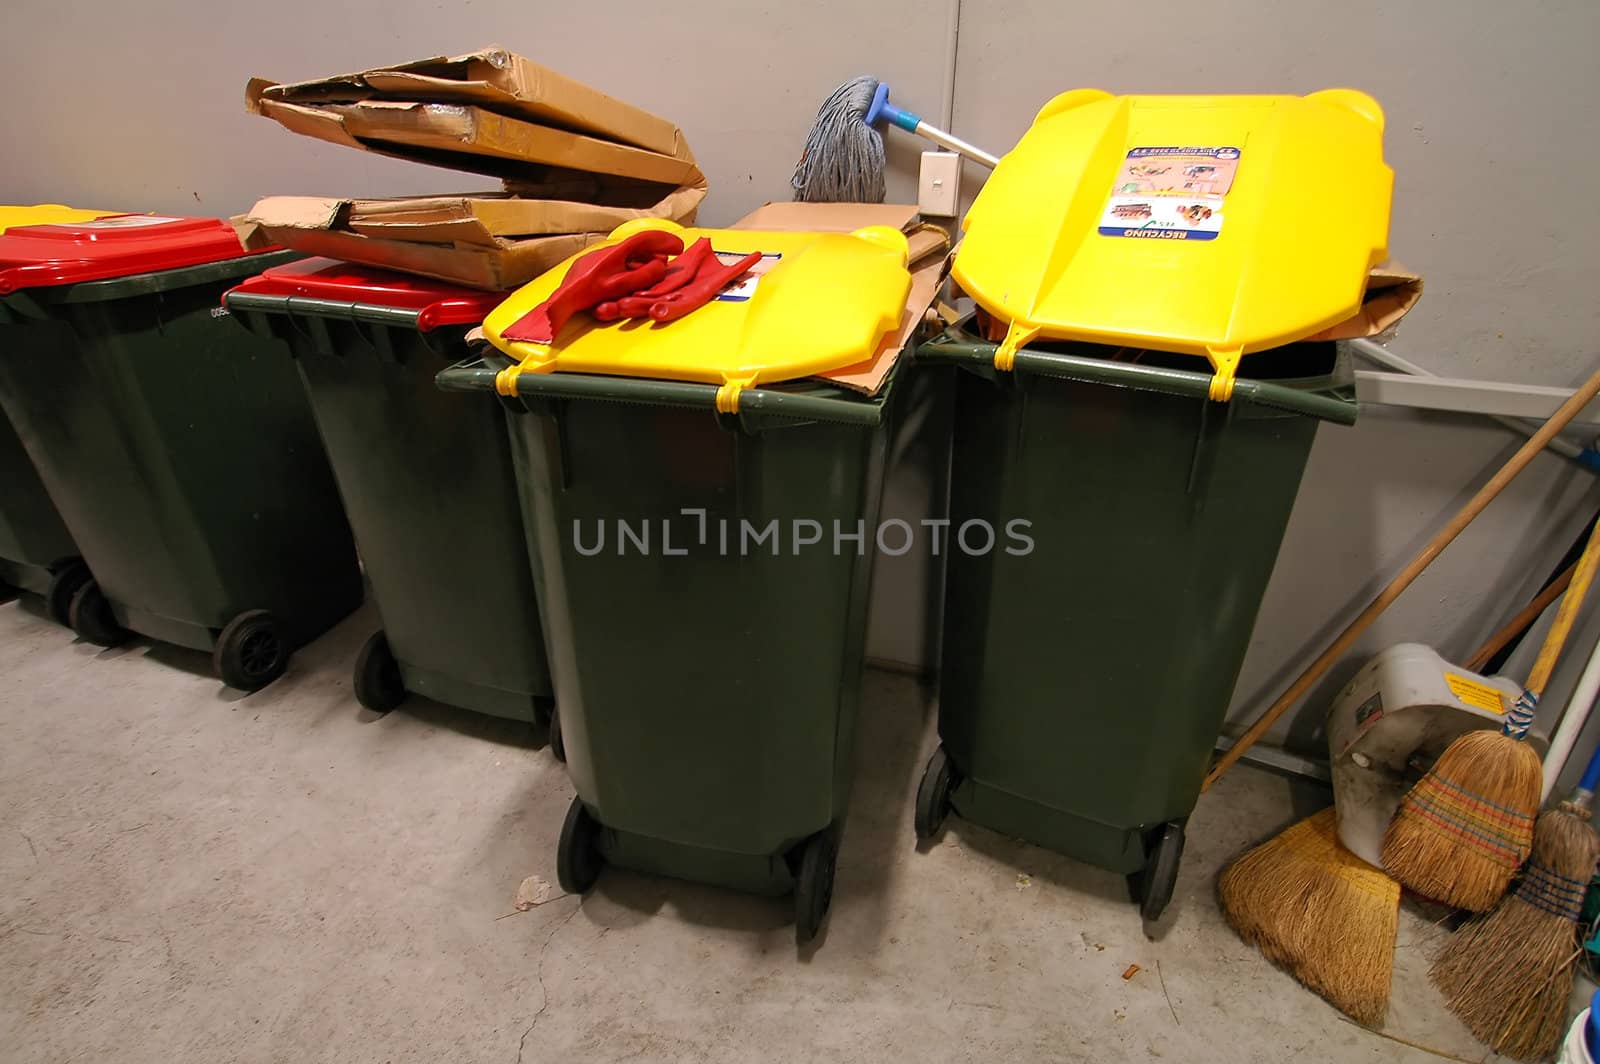 garbage room, yellow and red bins; wide angle shot